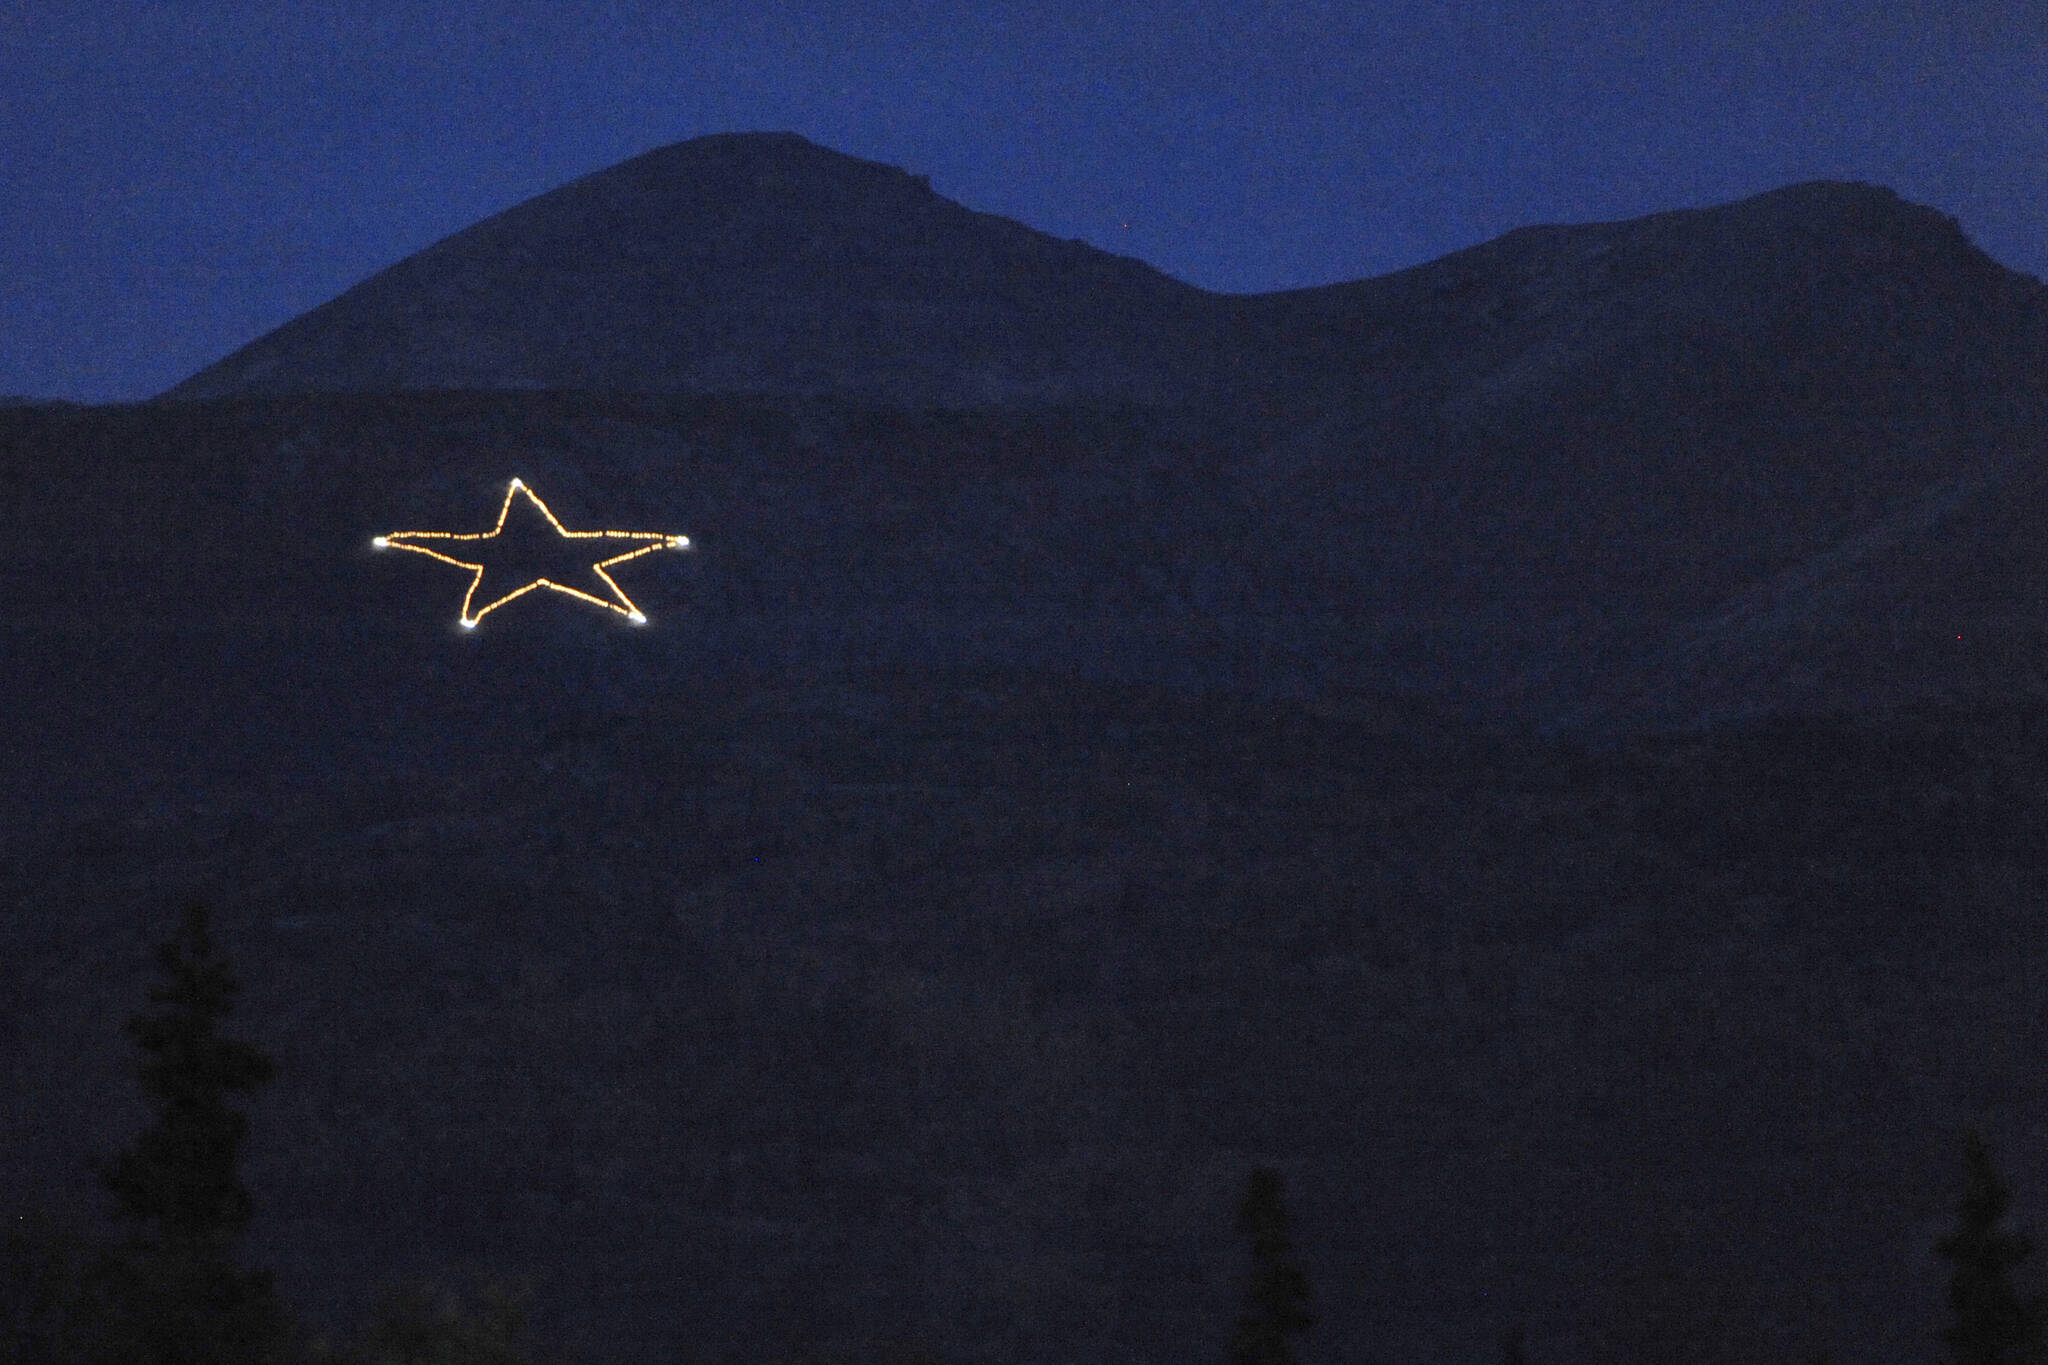 The Joint Base Elmendorf-Richardson star is Illuminated on the side of Mount Gordon Lyon on Wednesday, Sept. 11, 2019, just east of Anchorage, Alaska, in observation of the 18th anniversary of the terrorist attacks. A crew from the base went to light the 300-foot wide holiday star, but found that only half of the star’s 350 or so lights were working, the Anchorage Daily News reported. Airmen from the 773rd Civil Engineer Squadron Electrical Shop haven't been able to figure out what was wrong and repair the lights, but they plan to work through the week, if necessary, base spokesperson Erin Eaton said. (Bill Roth/Anchorage Daily News via AP)